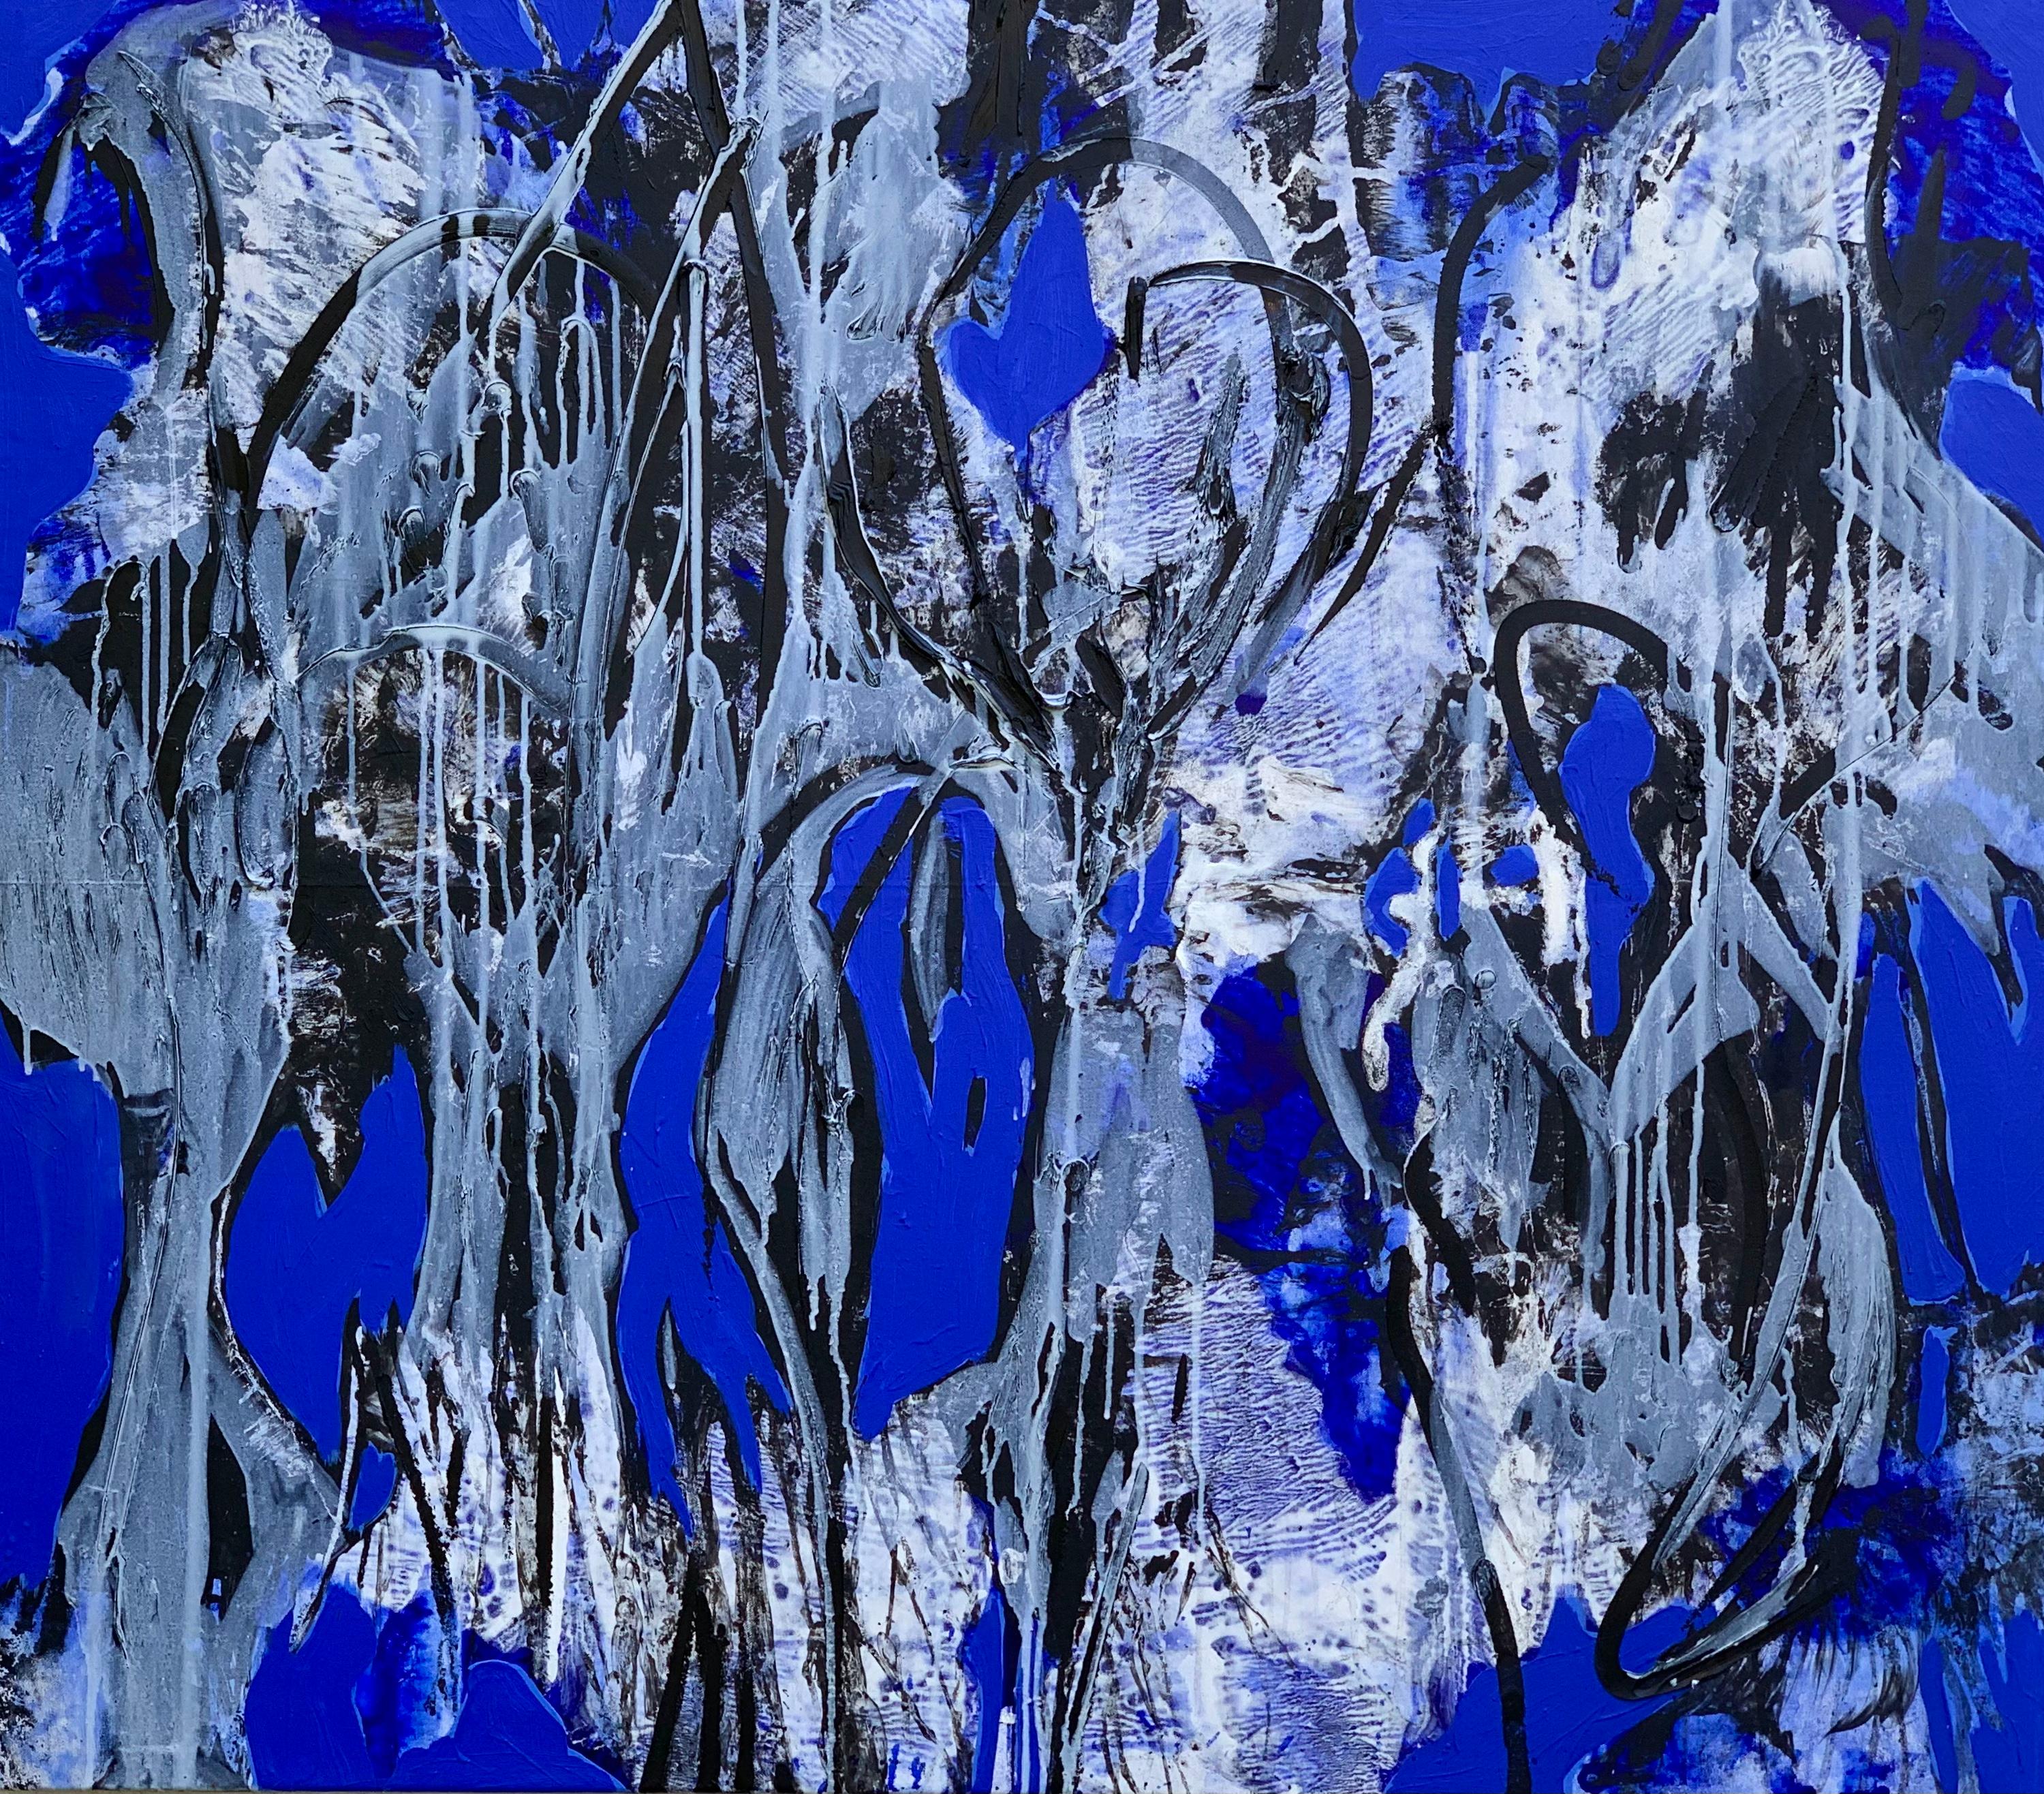  Untitled 10  - Contemporary Blue, Black  Abstract Oil Painting, Conceptual Art